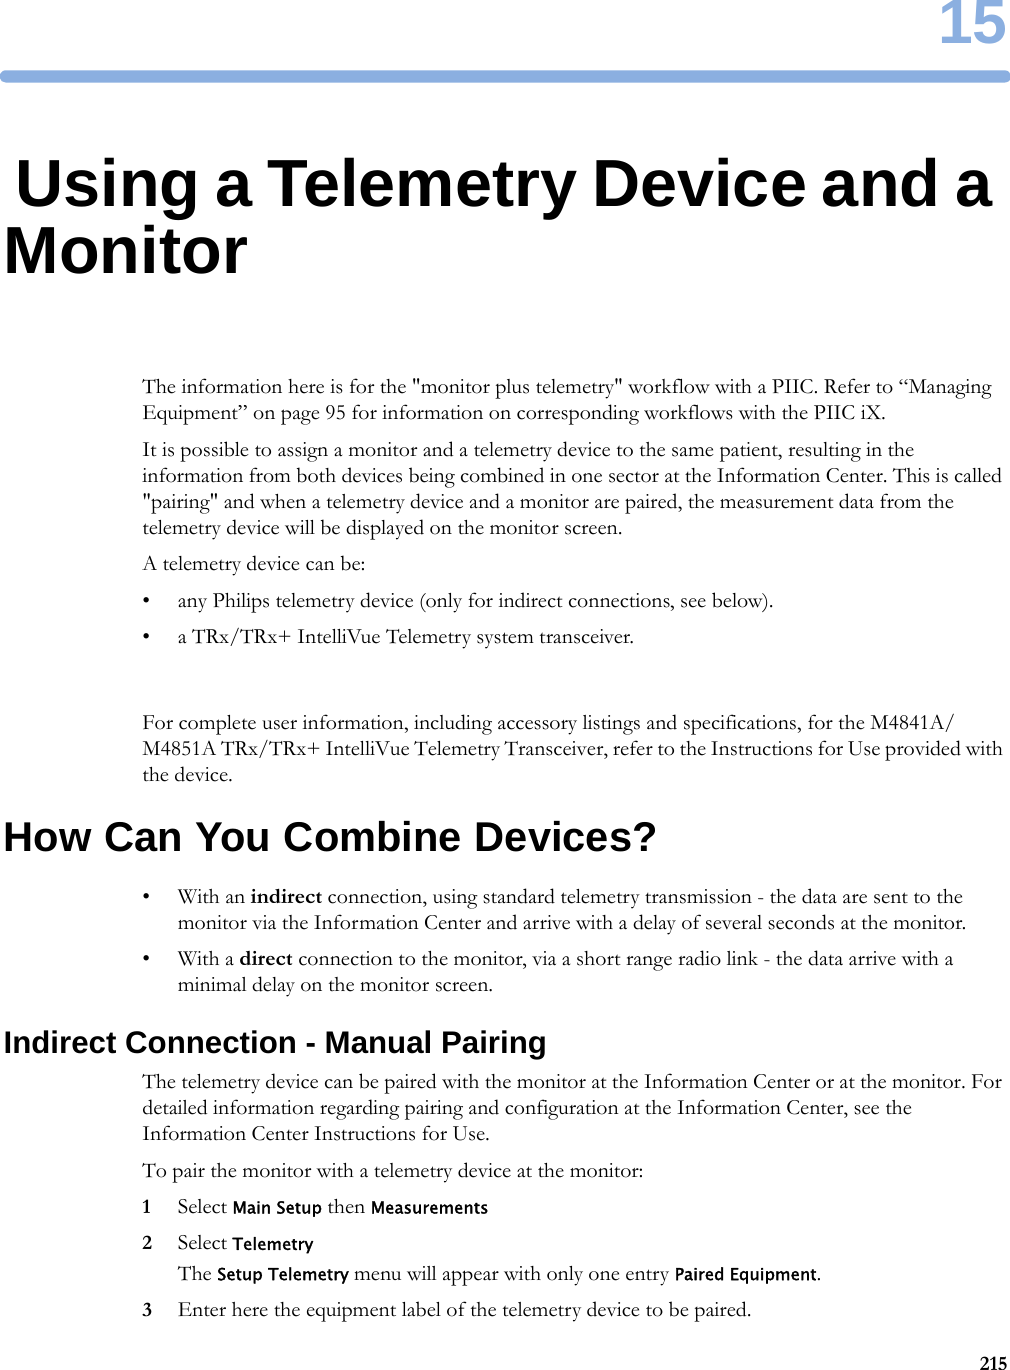 1521515Using a Telemetry Device and a MonitorThe information here is for the &quot;monitor plus telemetry&quot; workflow with a PIIC. Refer to “Managing Equipment” on page 95 for information on corresponding workflows with the PIIC iX.It is possible to assign a monitor and a telemetry device to the same patient, resulting in the information from both devices being combined in one sector at the Information Center. This is called &quot;pairing&quot; and when a telemetry device and a monitor are paired, the measurement data from the telemetry device will be displayed on the monitor screen.A telemetry device can be:• any Philips telemetry device (only for indirect connections, see below).• a TRx/TRx+ IntelliVue Telemetry system transceiver.For complete user information, including accessory listings and specifications, for the M4841A/M4851A TRx/TRx+ IntelliVue Telemetry Transceiver, refer to the Instructions for Use provided with the device.How Can You Combine Devices?•With an indirect connection, using standard telemetry transmission - the data are sent to the monitor via the Information Center and arrive with a delay of several seconds at the monitor.•With a direct connection to the monitor, via a short range radio link - the data arrive with a minimal delay on the monitor screen.Indirect Connection - Manual PairingThe telemetry device can be paired with the monitor at the Information Center or at the monitor. For detailed information regarding pairing and configuration at the Information Center, see the Information Center Instructions for Use.To pair the monitor with a telemetry device at the monitor:1Select Main Setup then Measurements2Select TelemetryThe Setup Telemetry menu will appear with only one entry Paired Equipment.3Enter here the equipment label of the telemetry device to be paired.